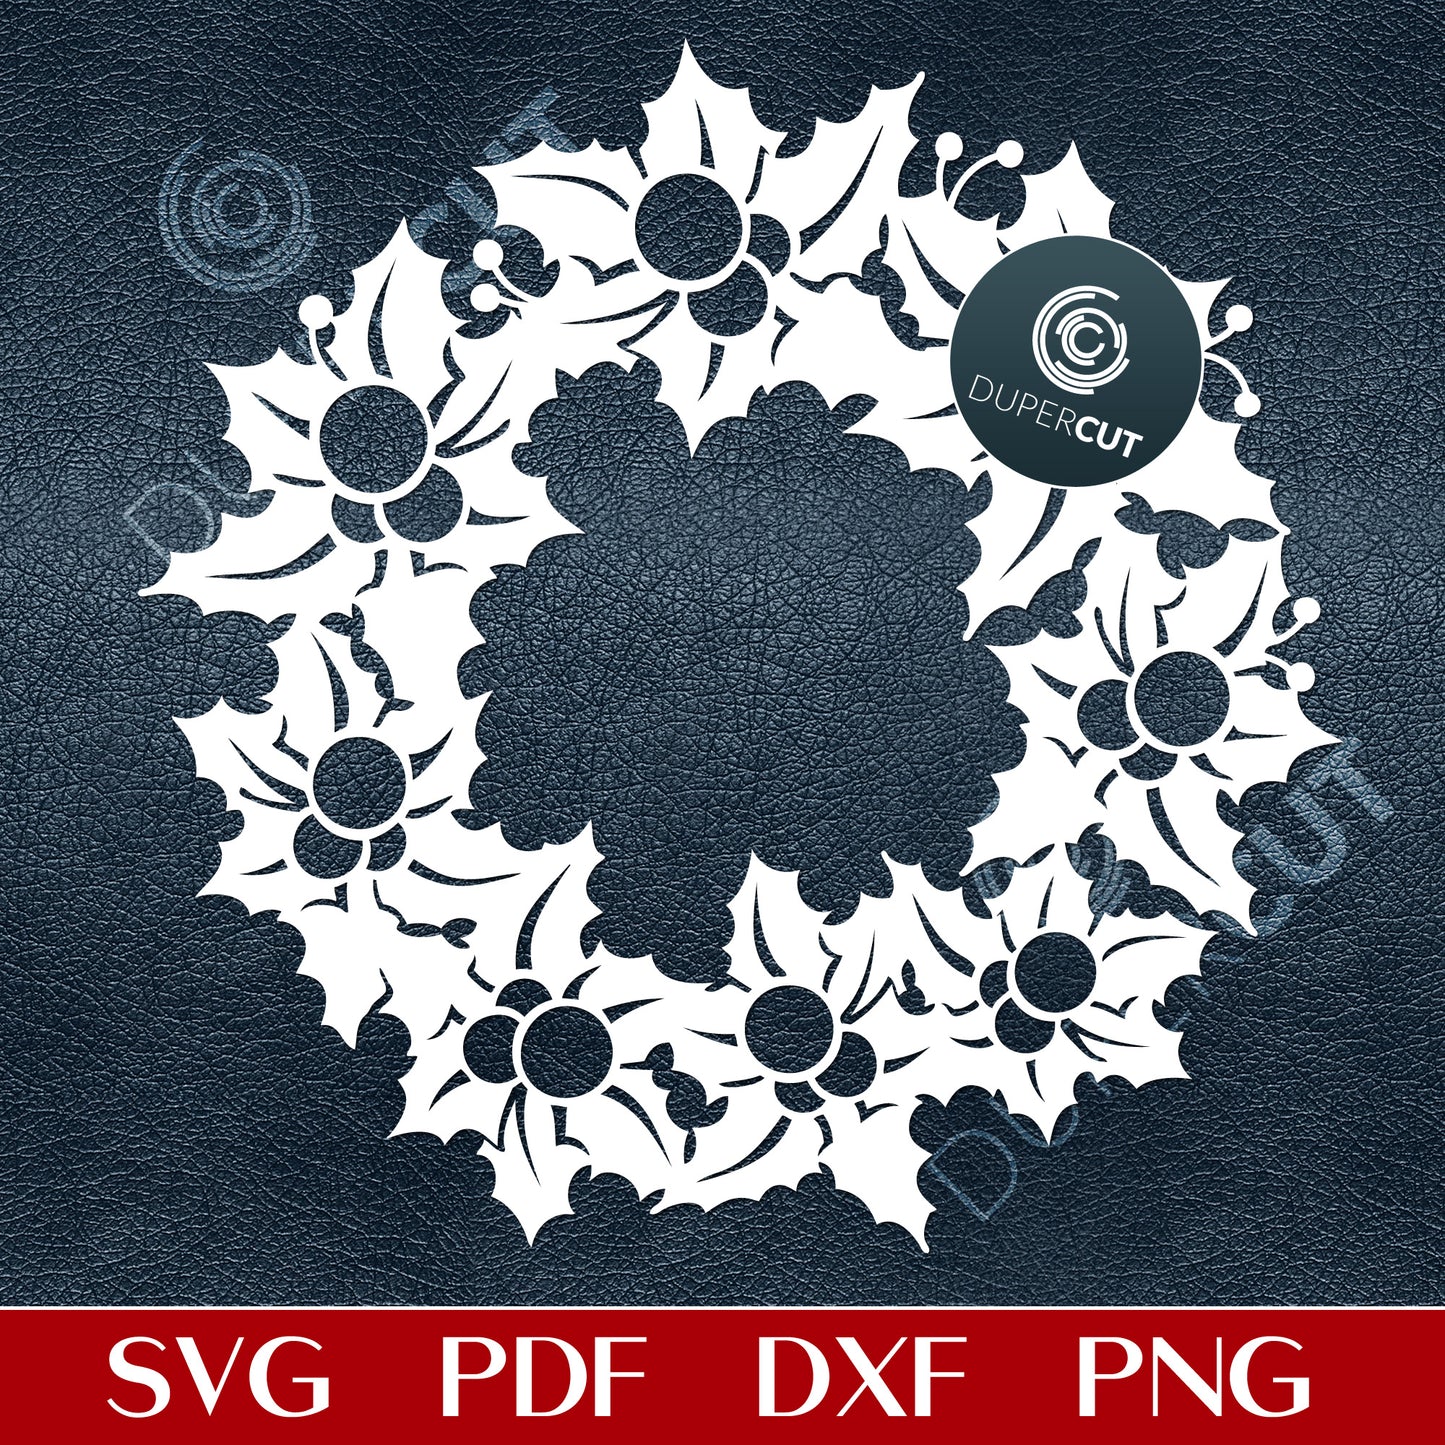 Simple Christmas wreath for beginners - SVG DXF PNG files for laser cutting, Glowforge, Cricut, Silhouette Cameo, CNC plasma machines